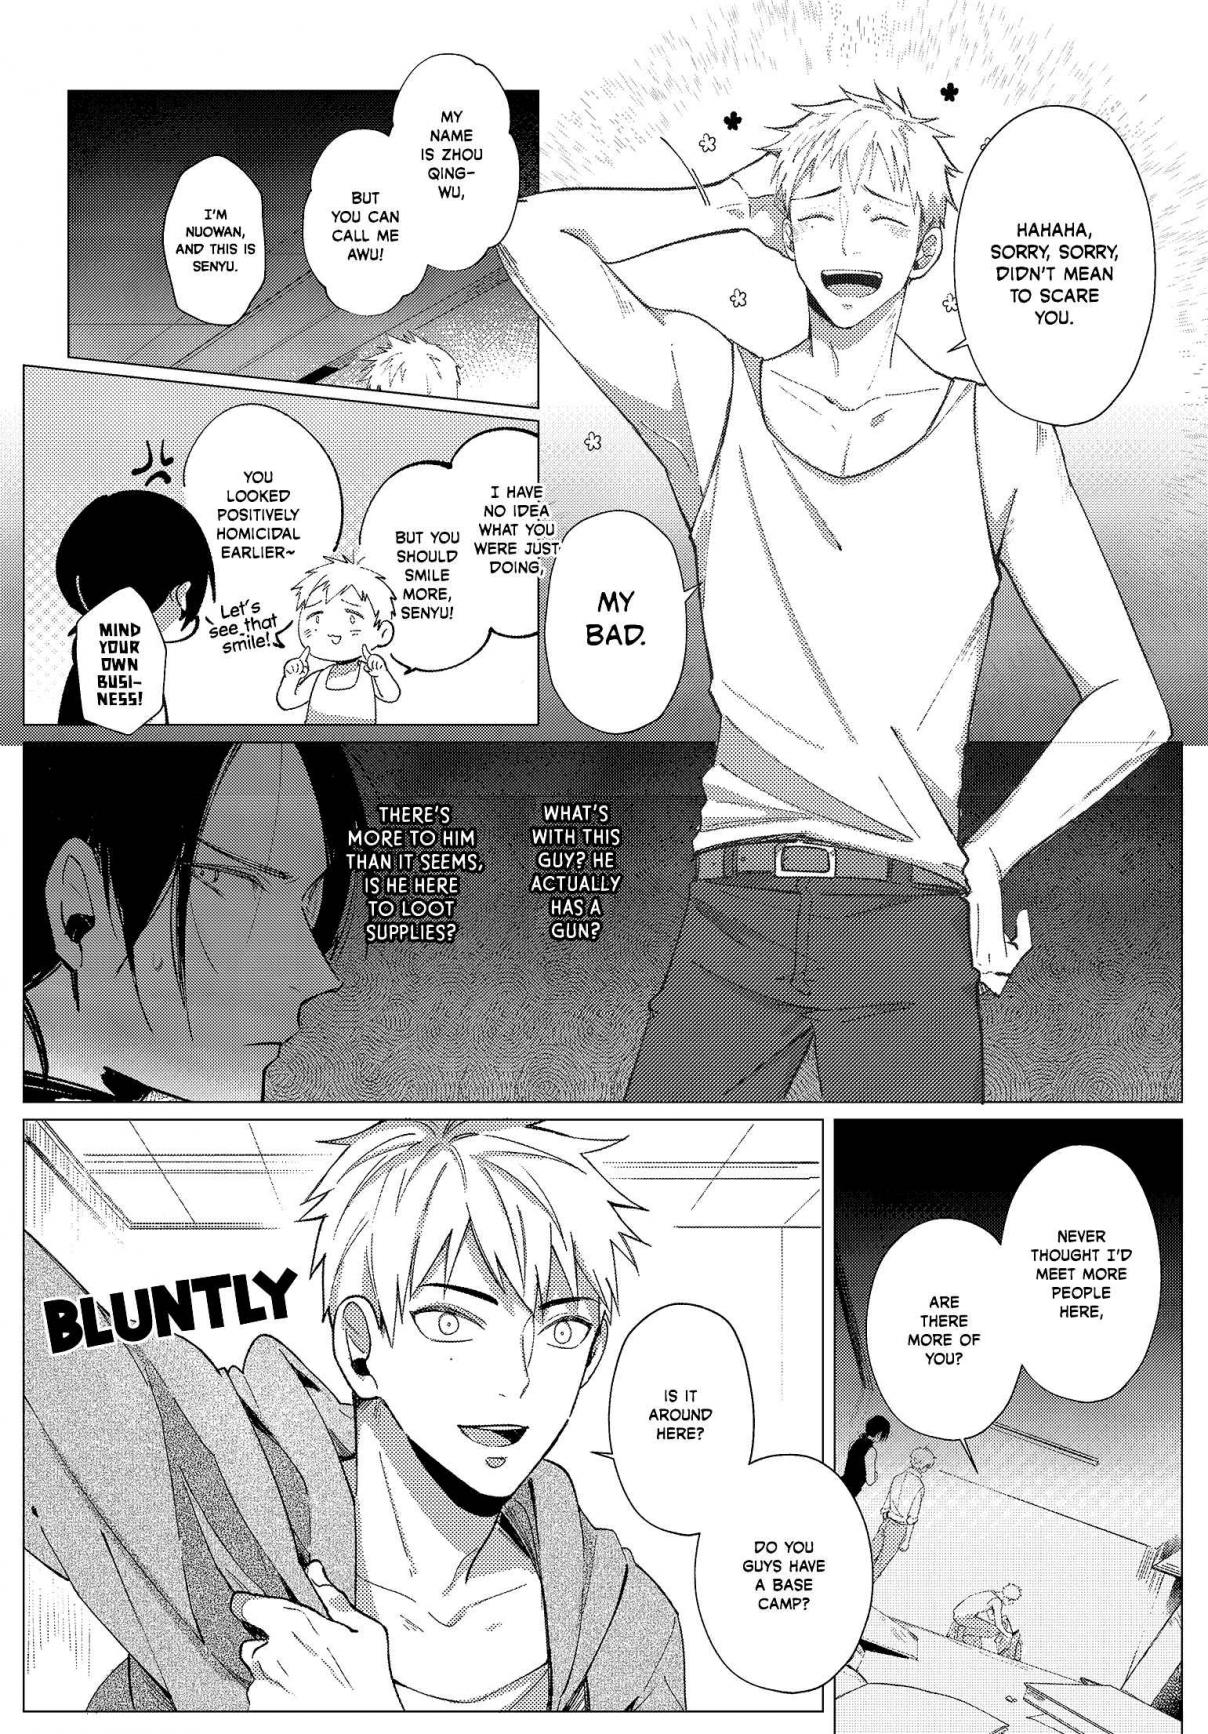 At The End Of The World, I Still Want To Be With You Vol. 1 Ch. 3